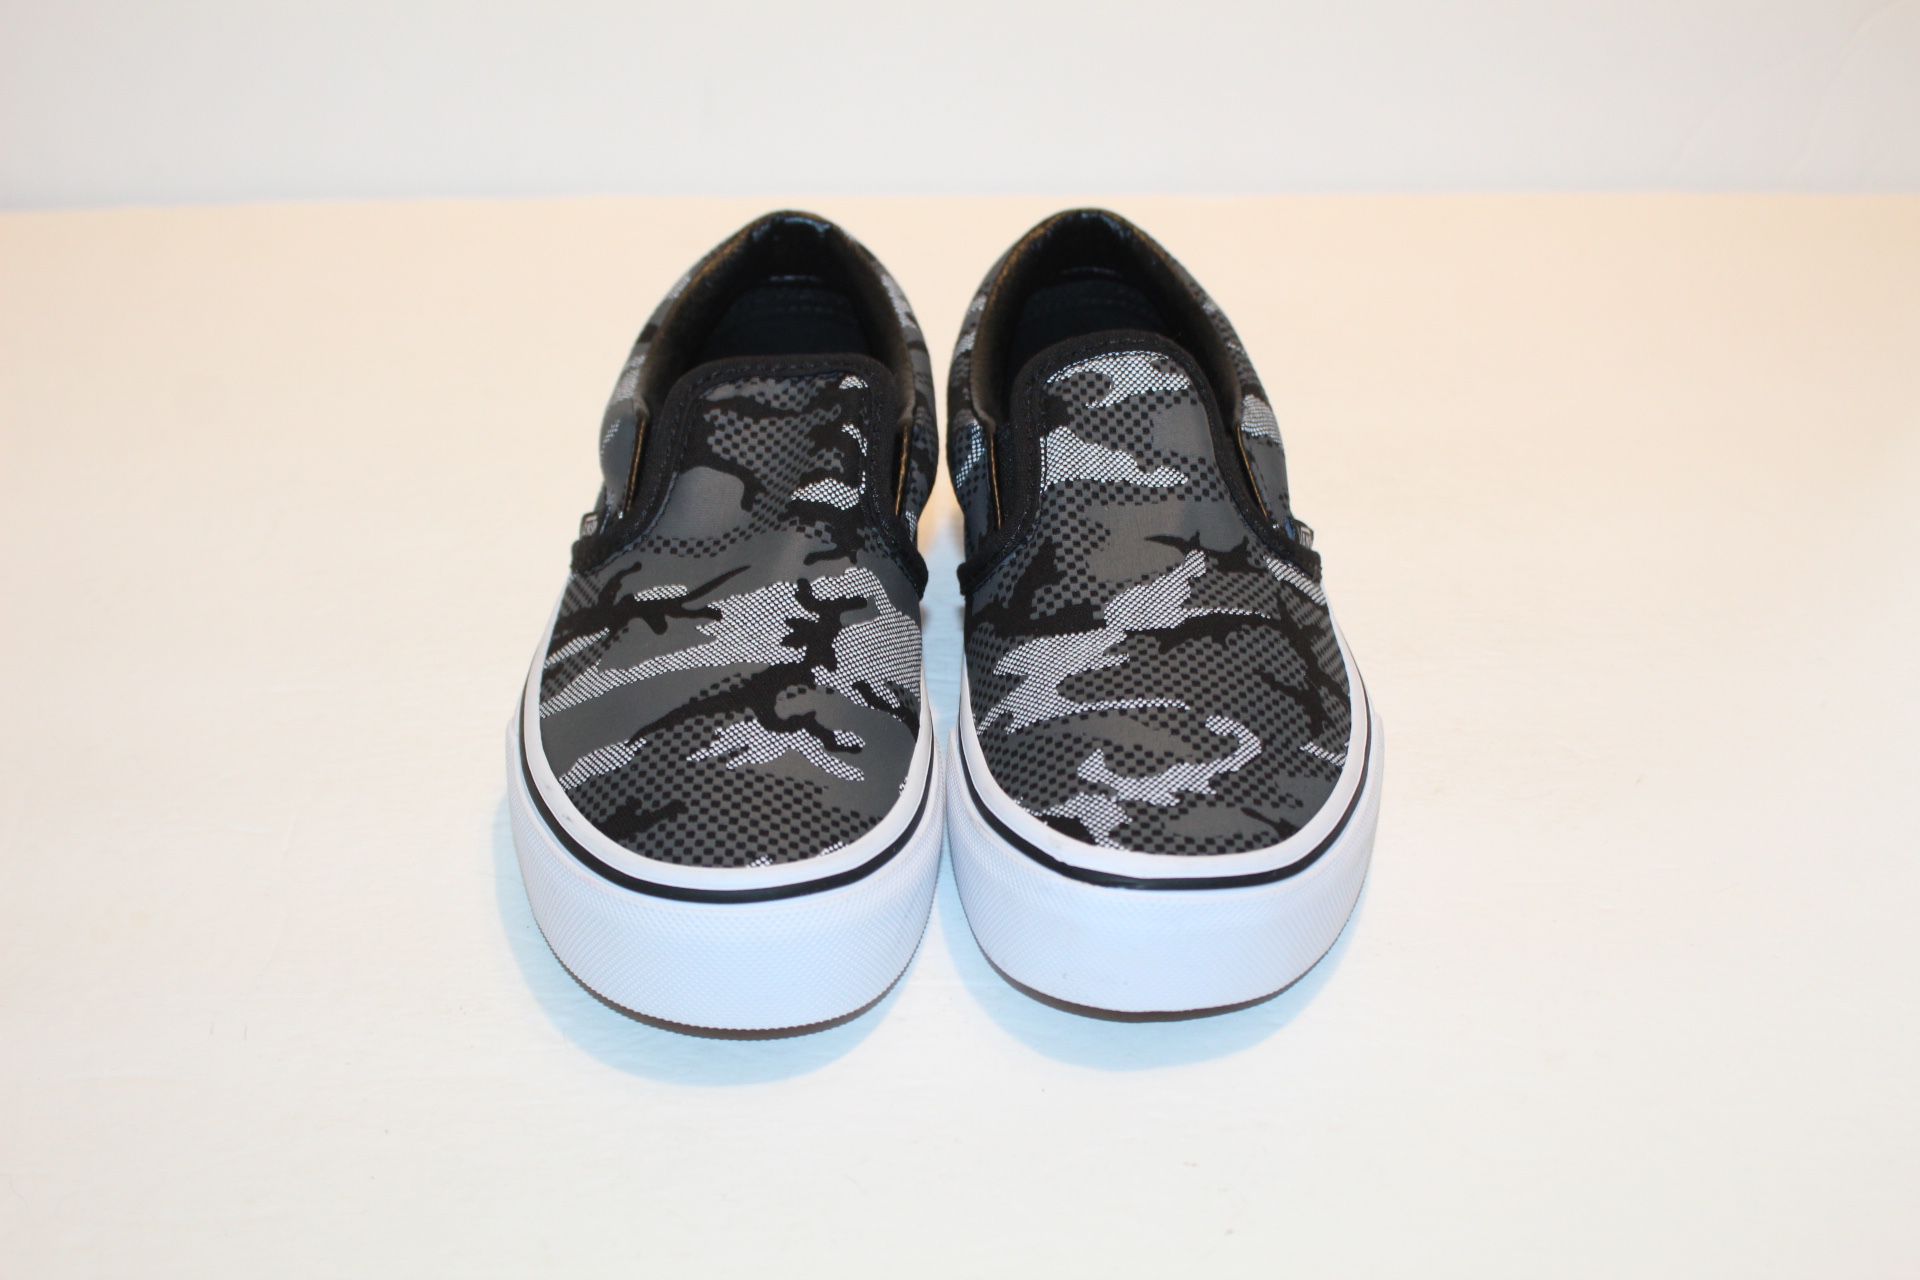 Kids Camo Slip On Vans Size 2 New for Sale in Westmont, IL - OfferUp